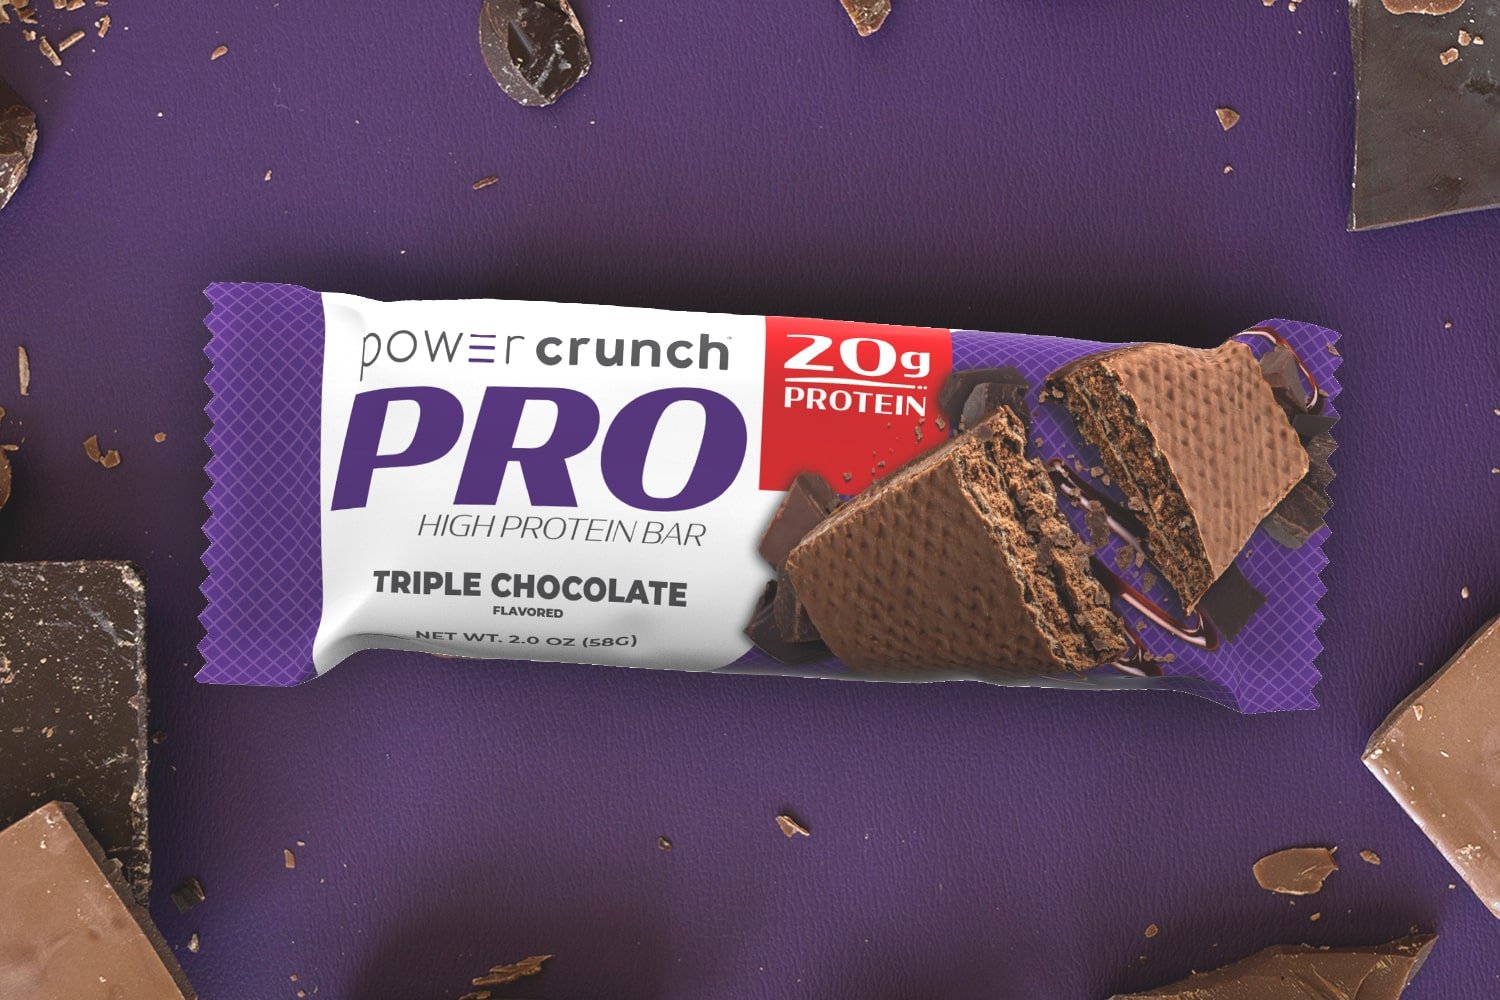 Triple Chocolate high protein bars as an on-the-go snack